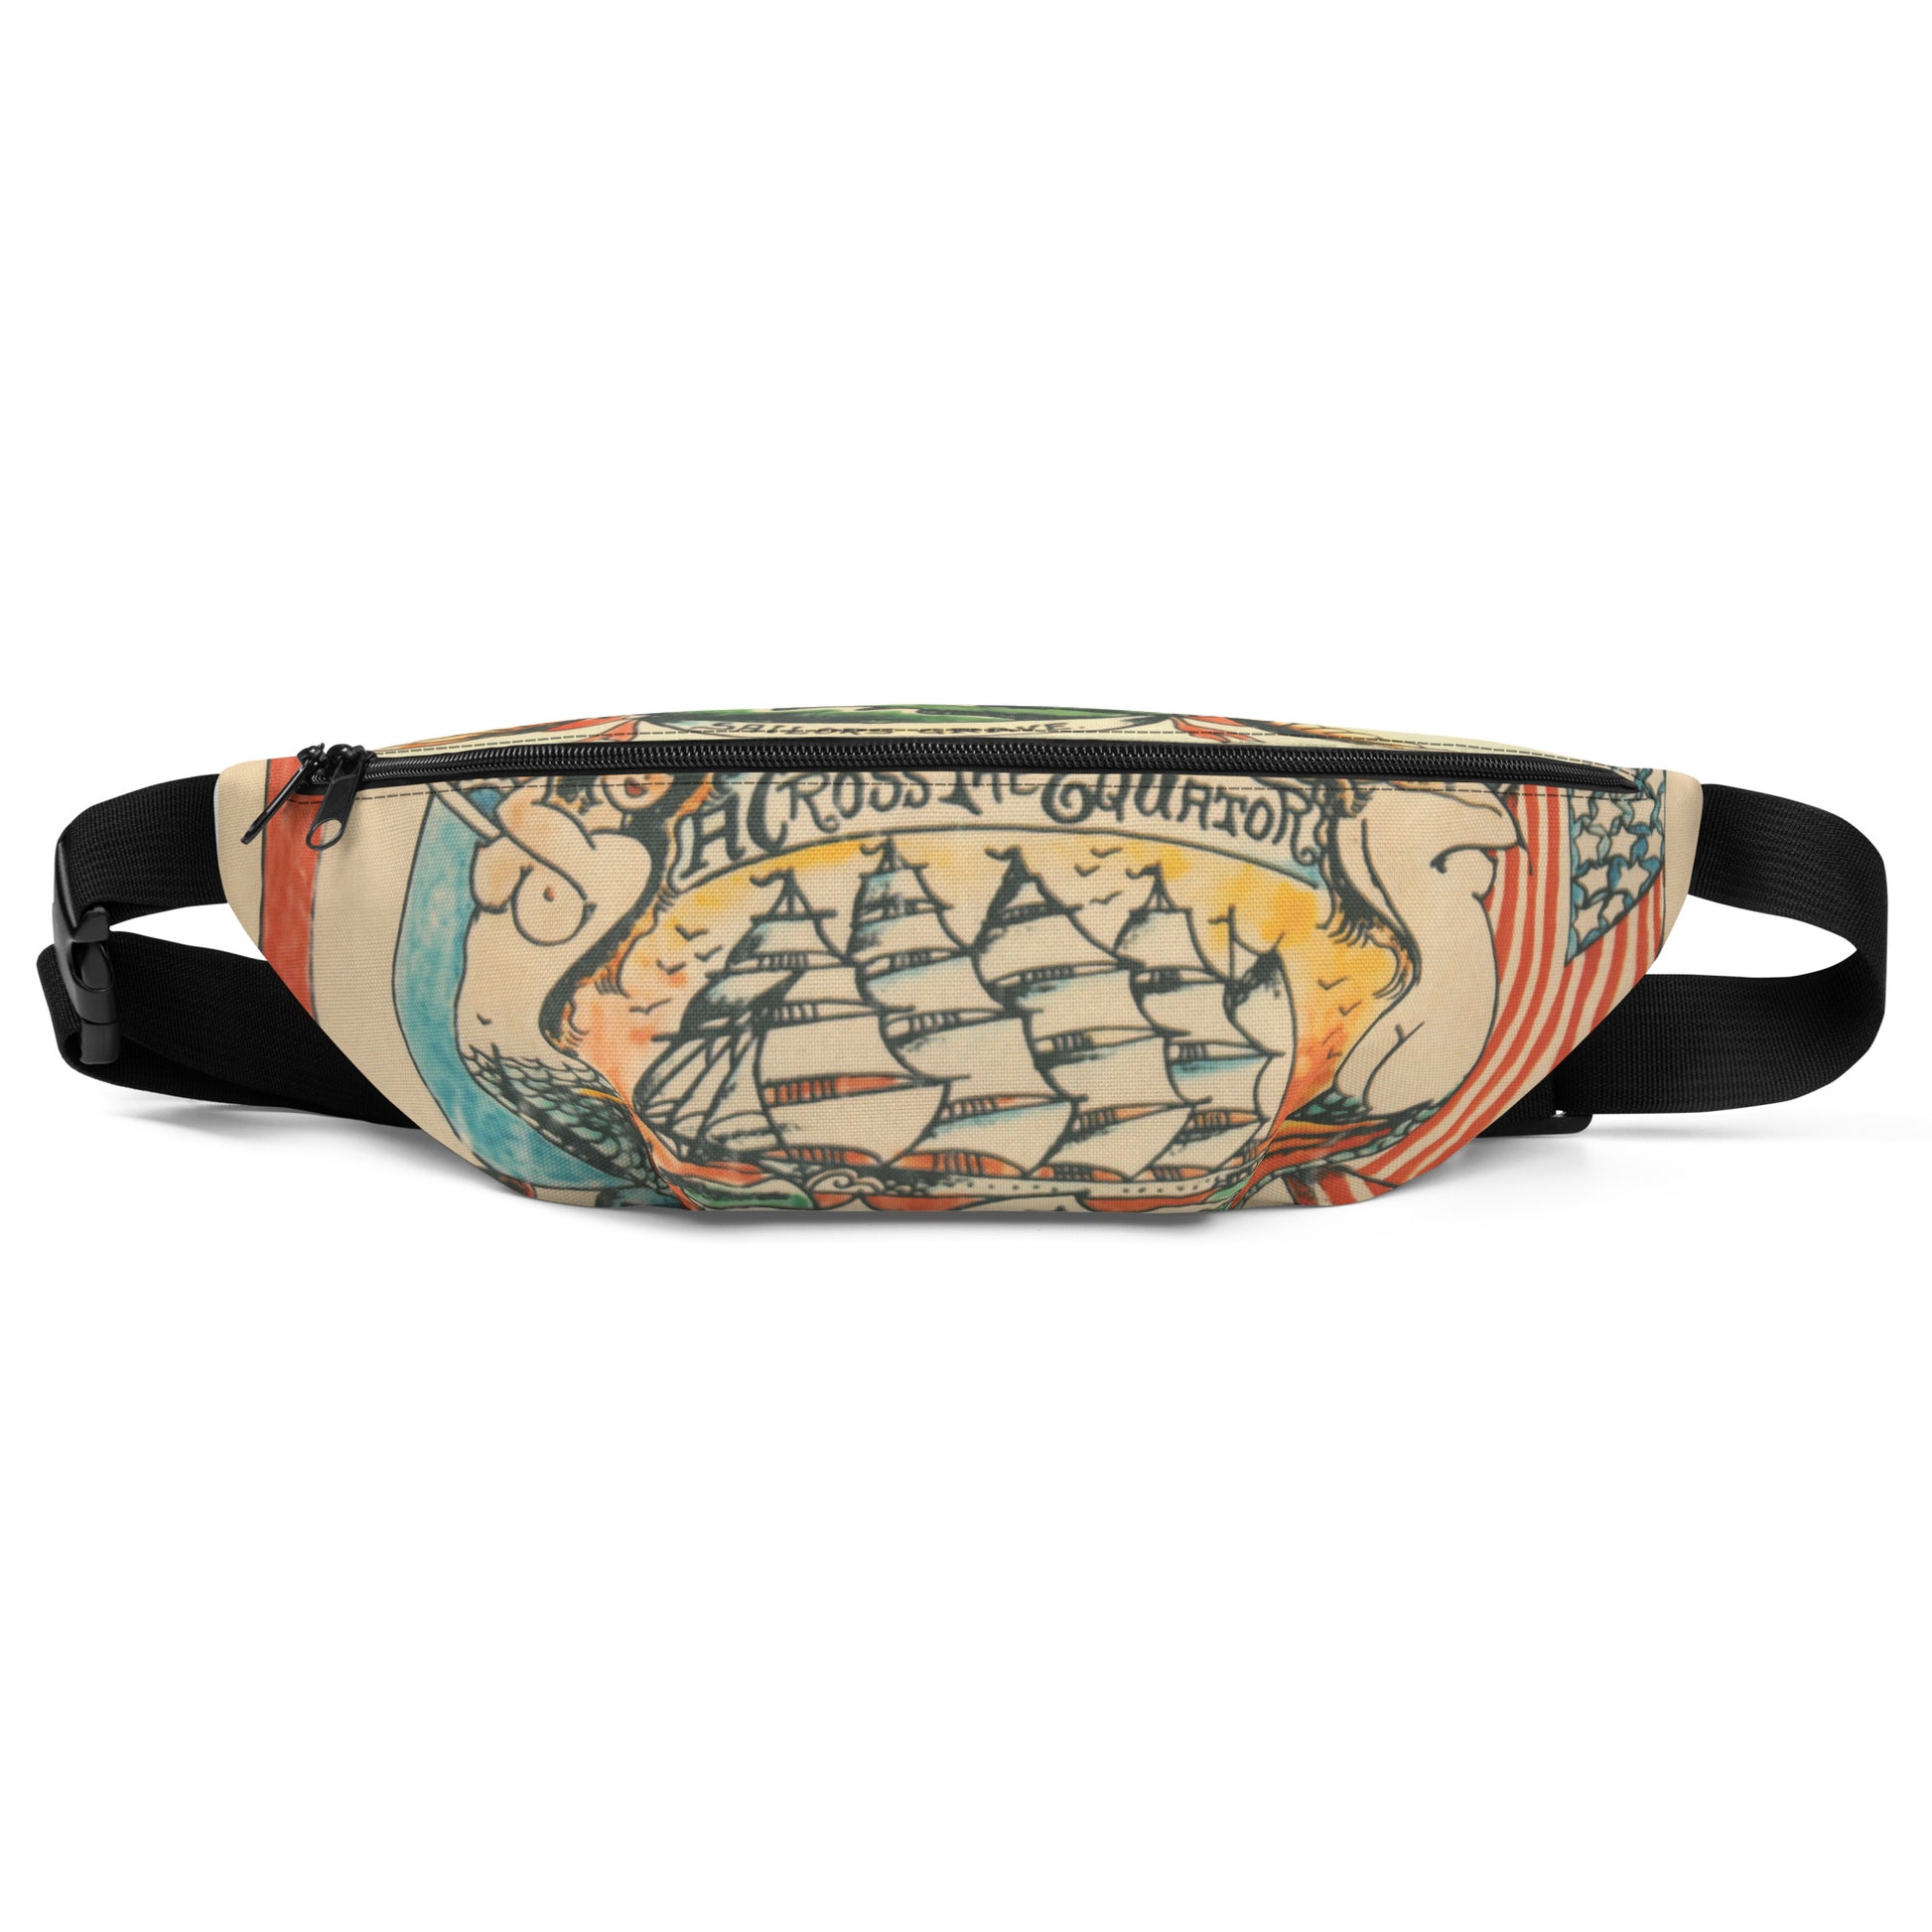 Fanny pack with unique ship design for safe keeping front